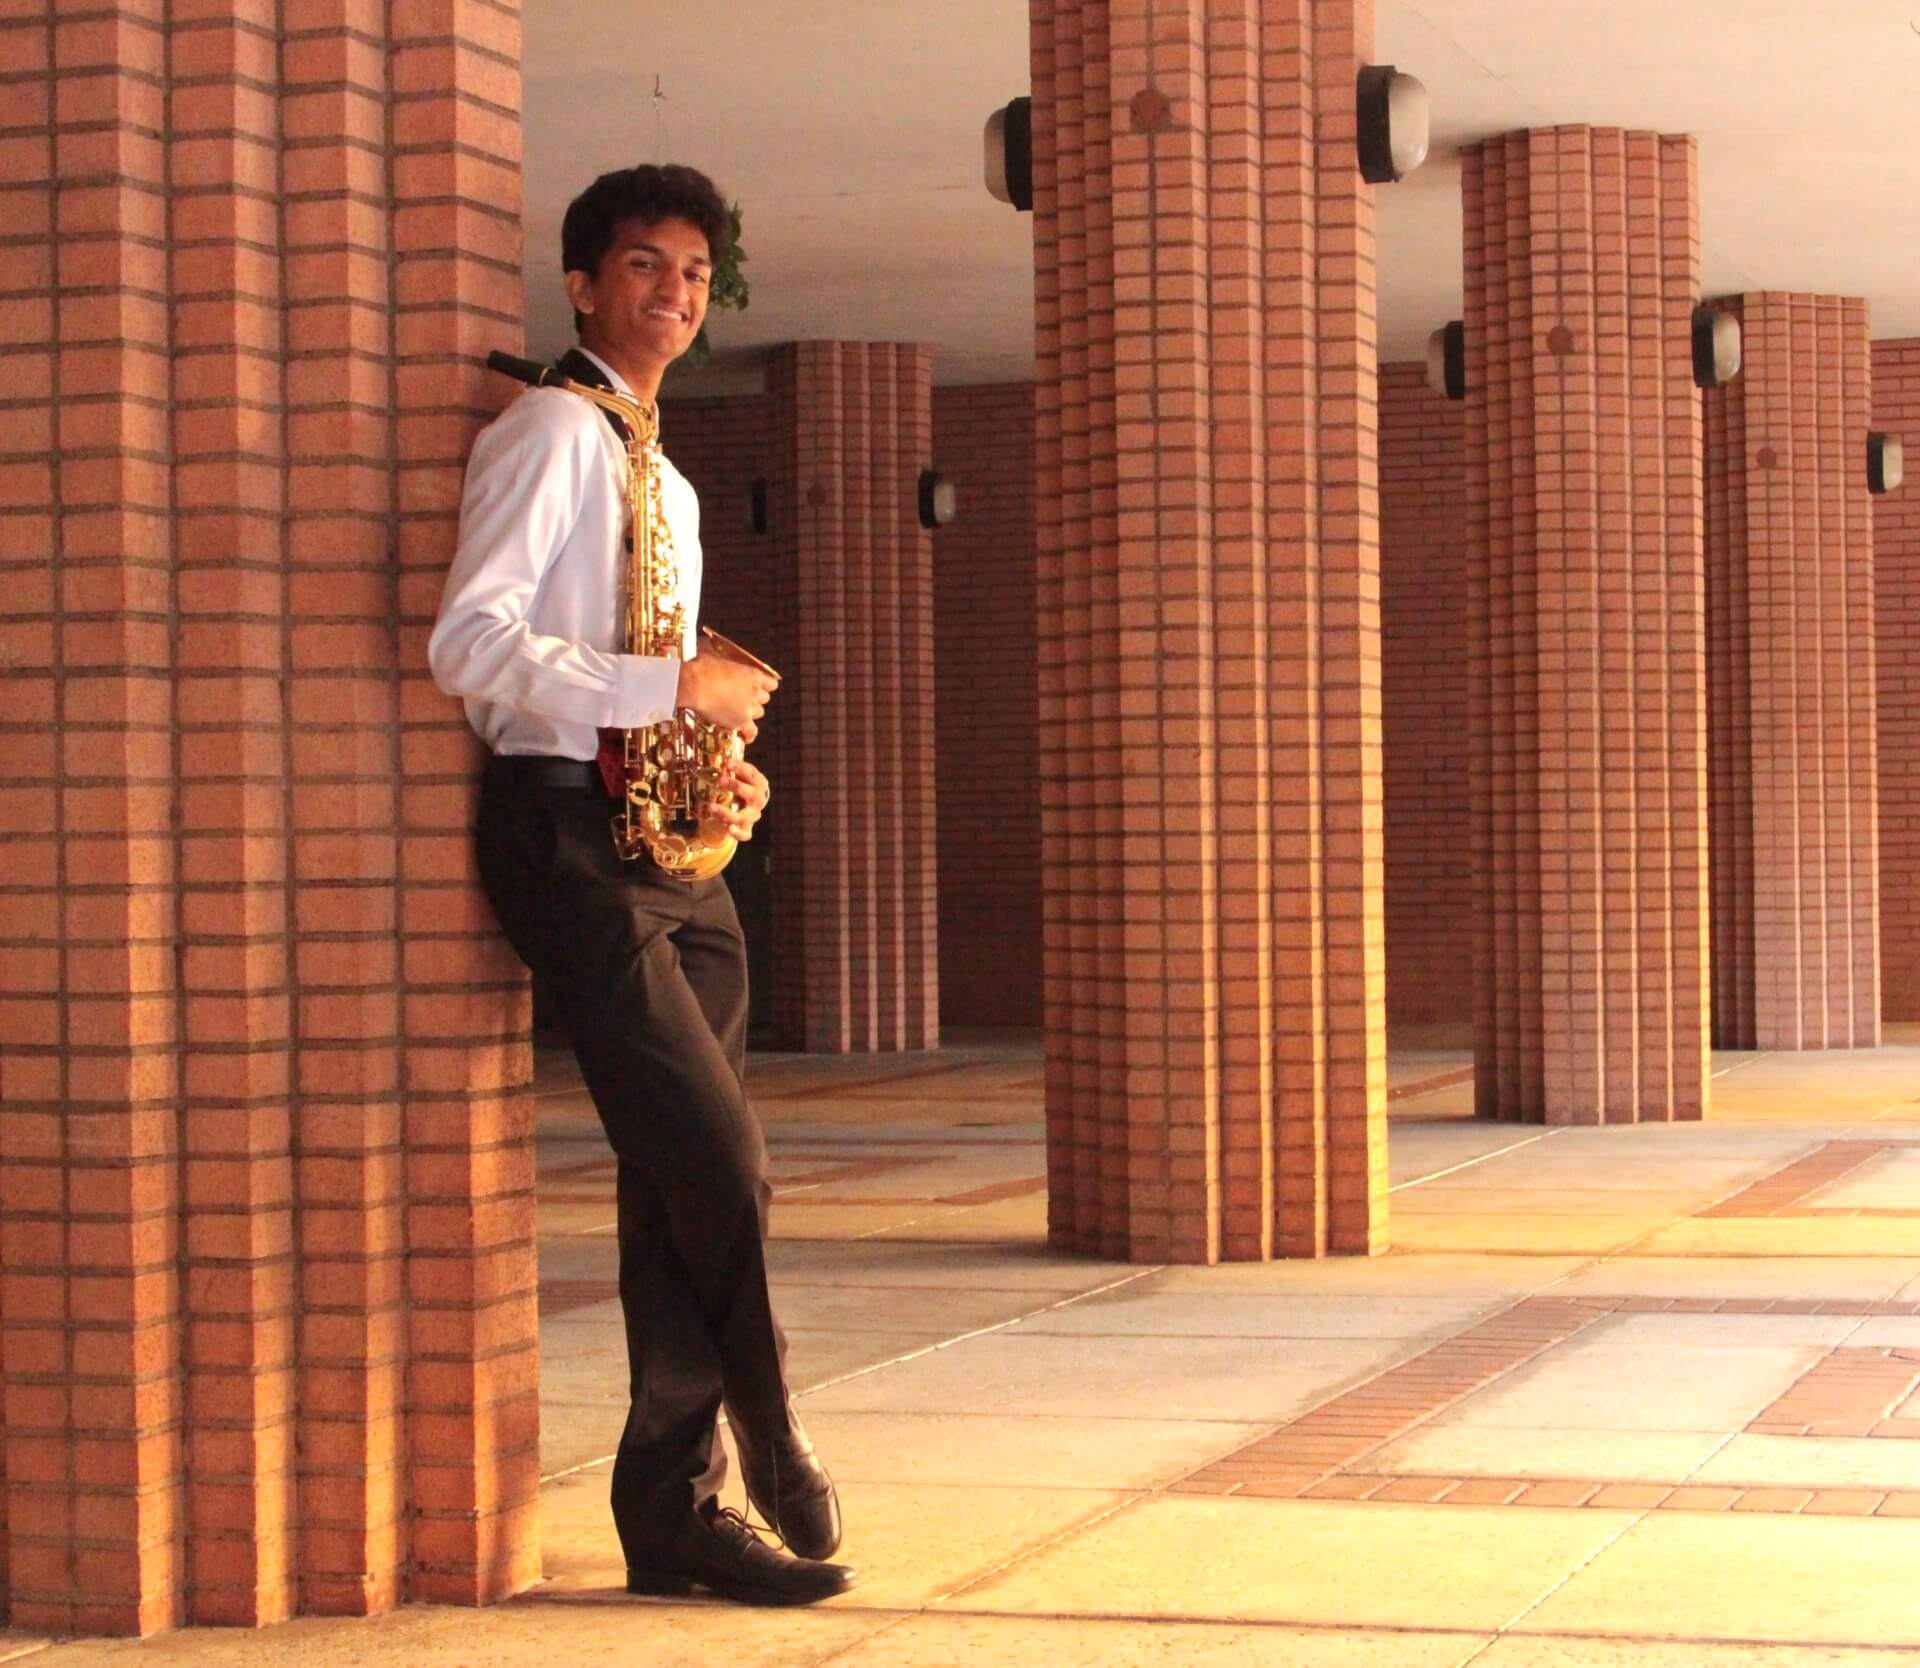 Sridhara plays the classical saxophone and completed a minor in music. Image/Ryan Alimento.